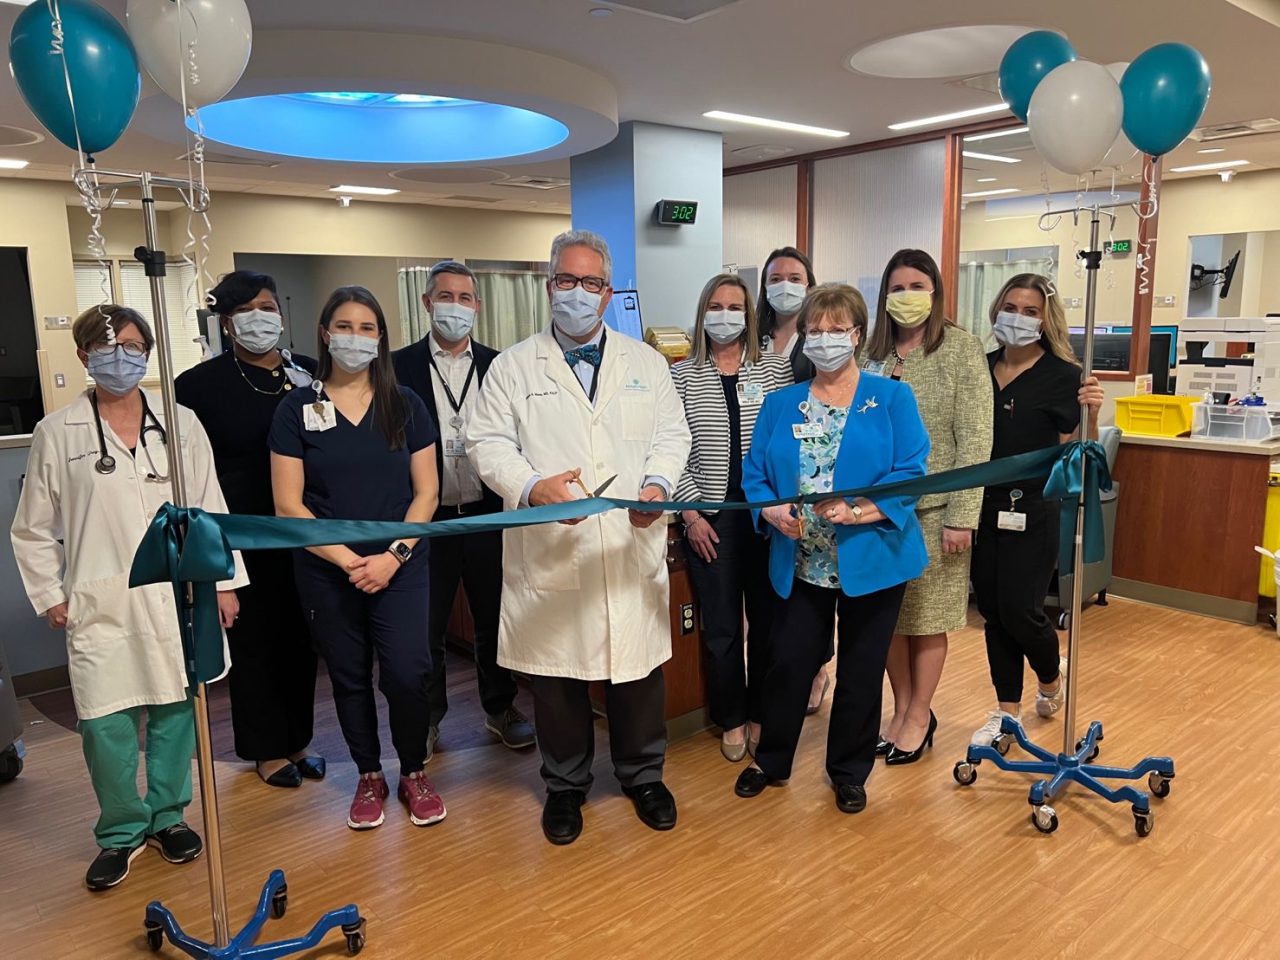 Melissa Barnes: We celebrated the opening of Infusion Immediate Care